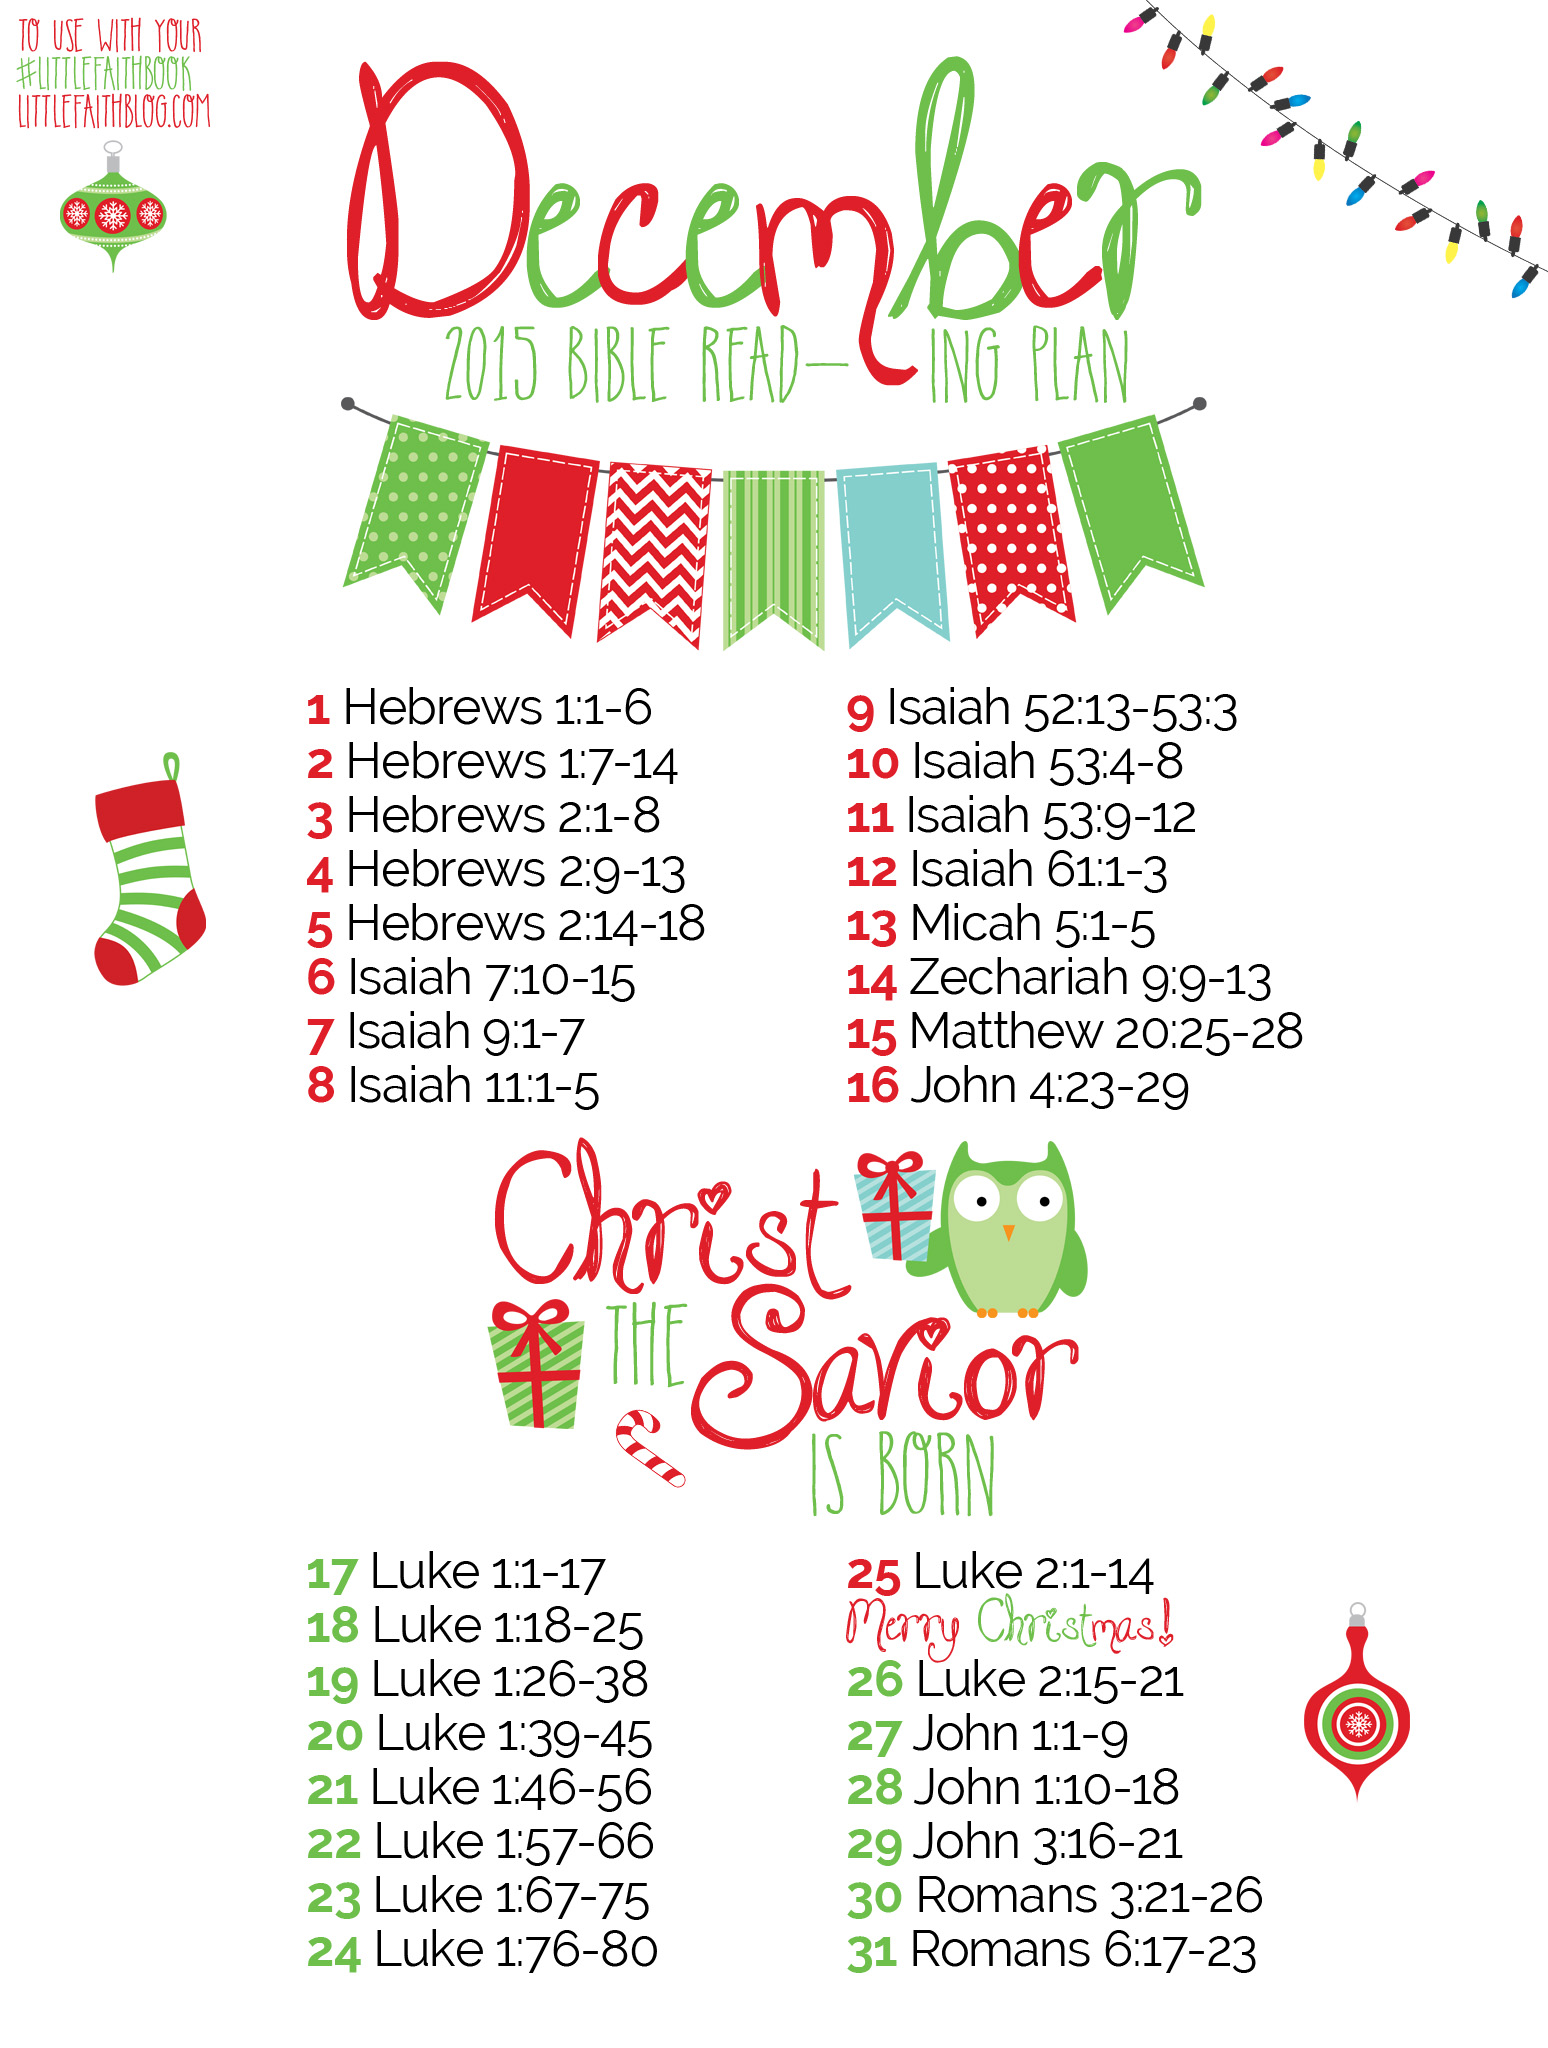 The Complete Collection: 2015 Bible Reading Plans